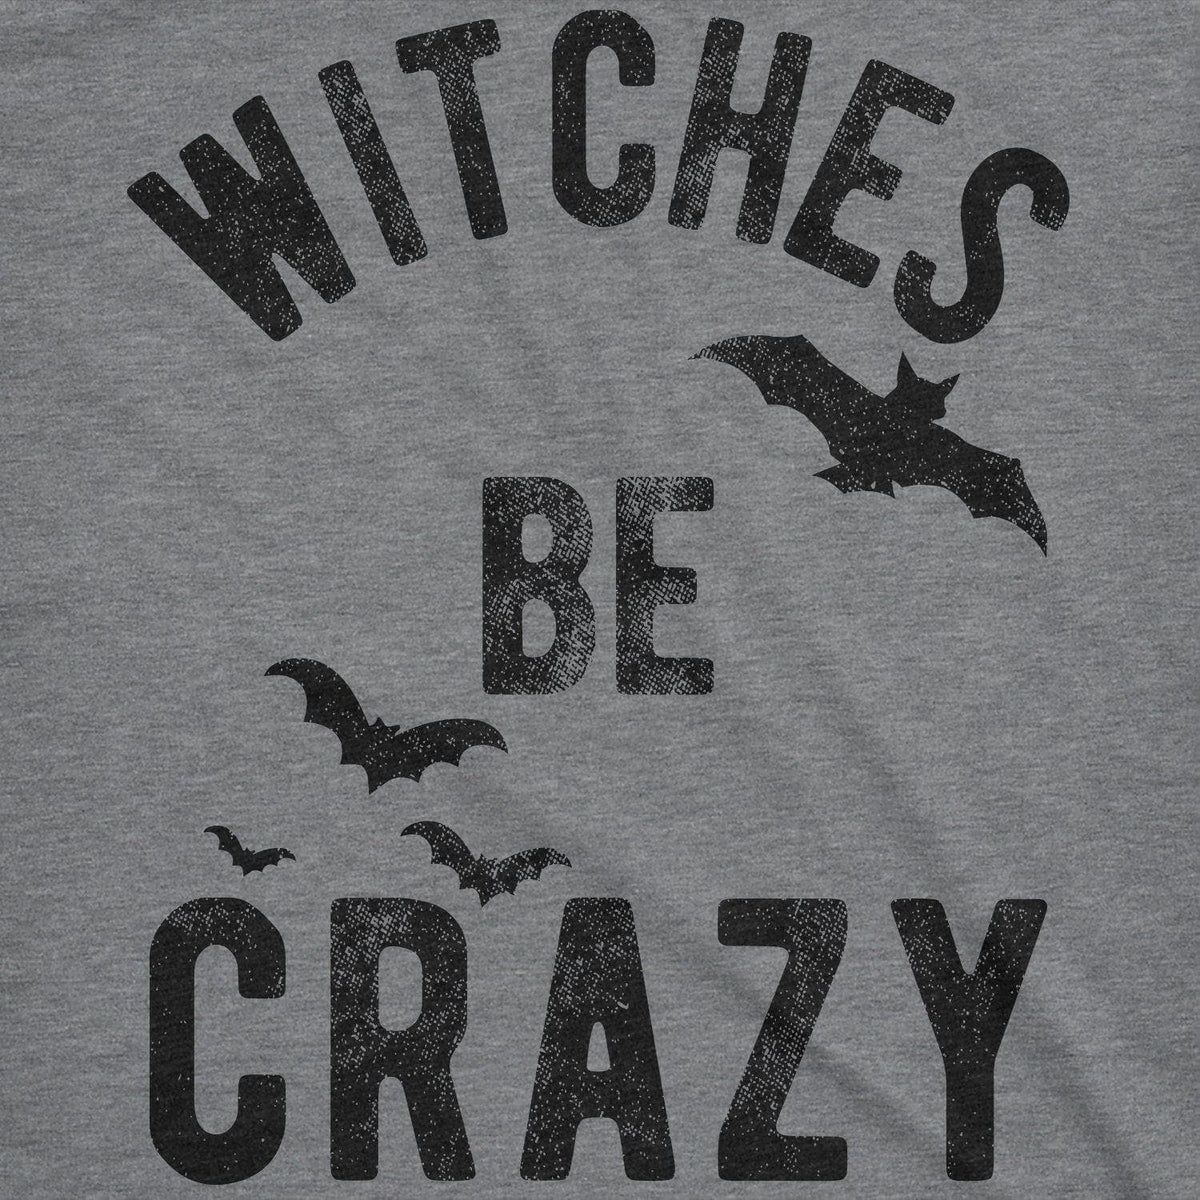 Witches Be Crazy Men&#39;s Tshirt  -  Crazy Dog T-Shirts